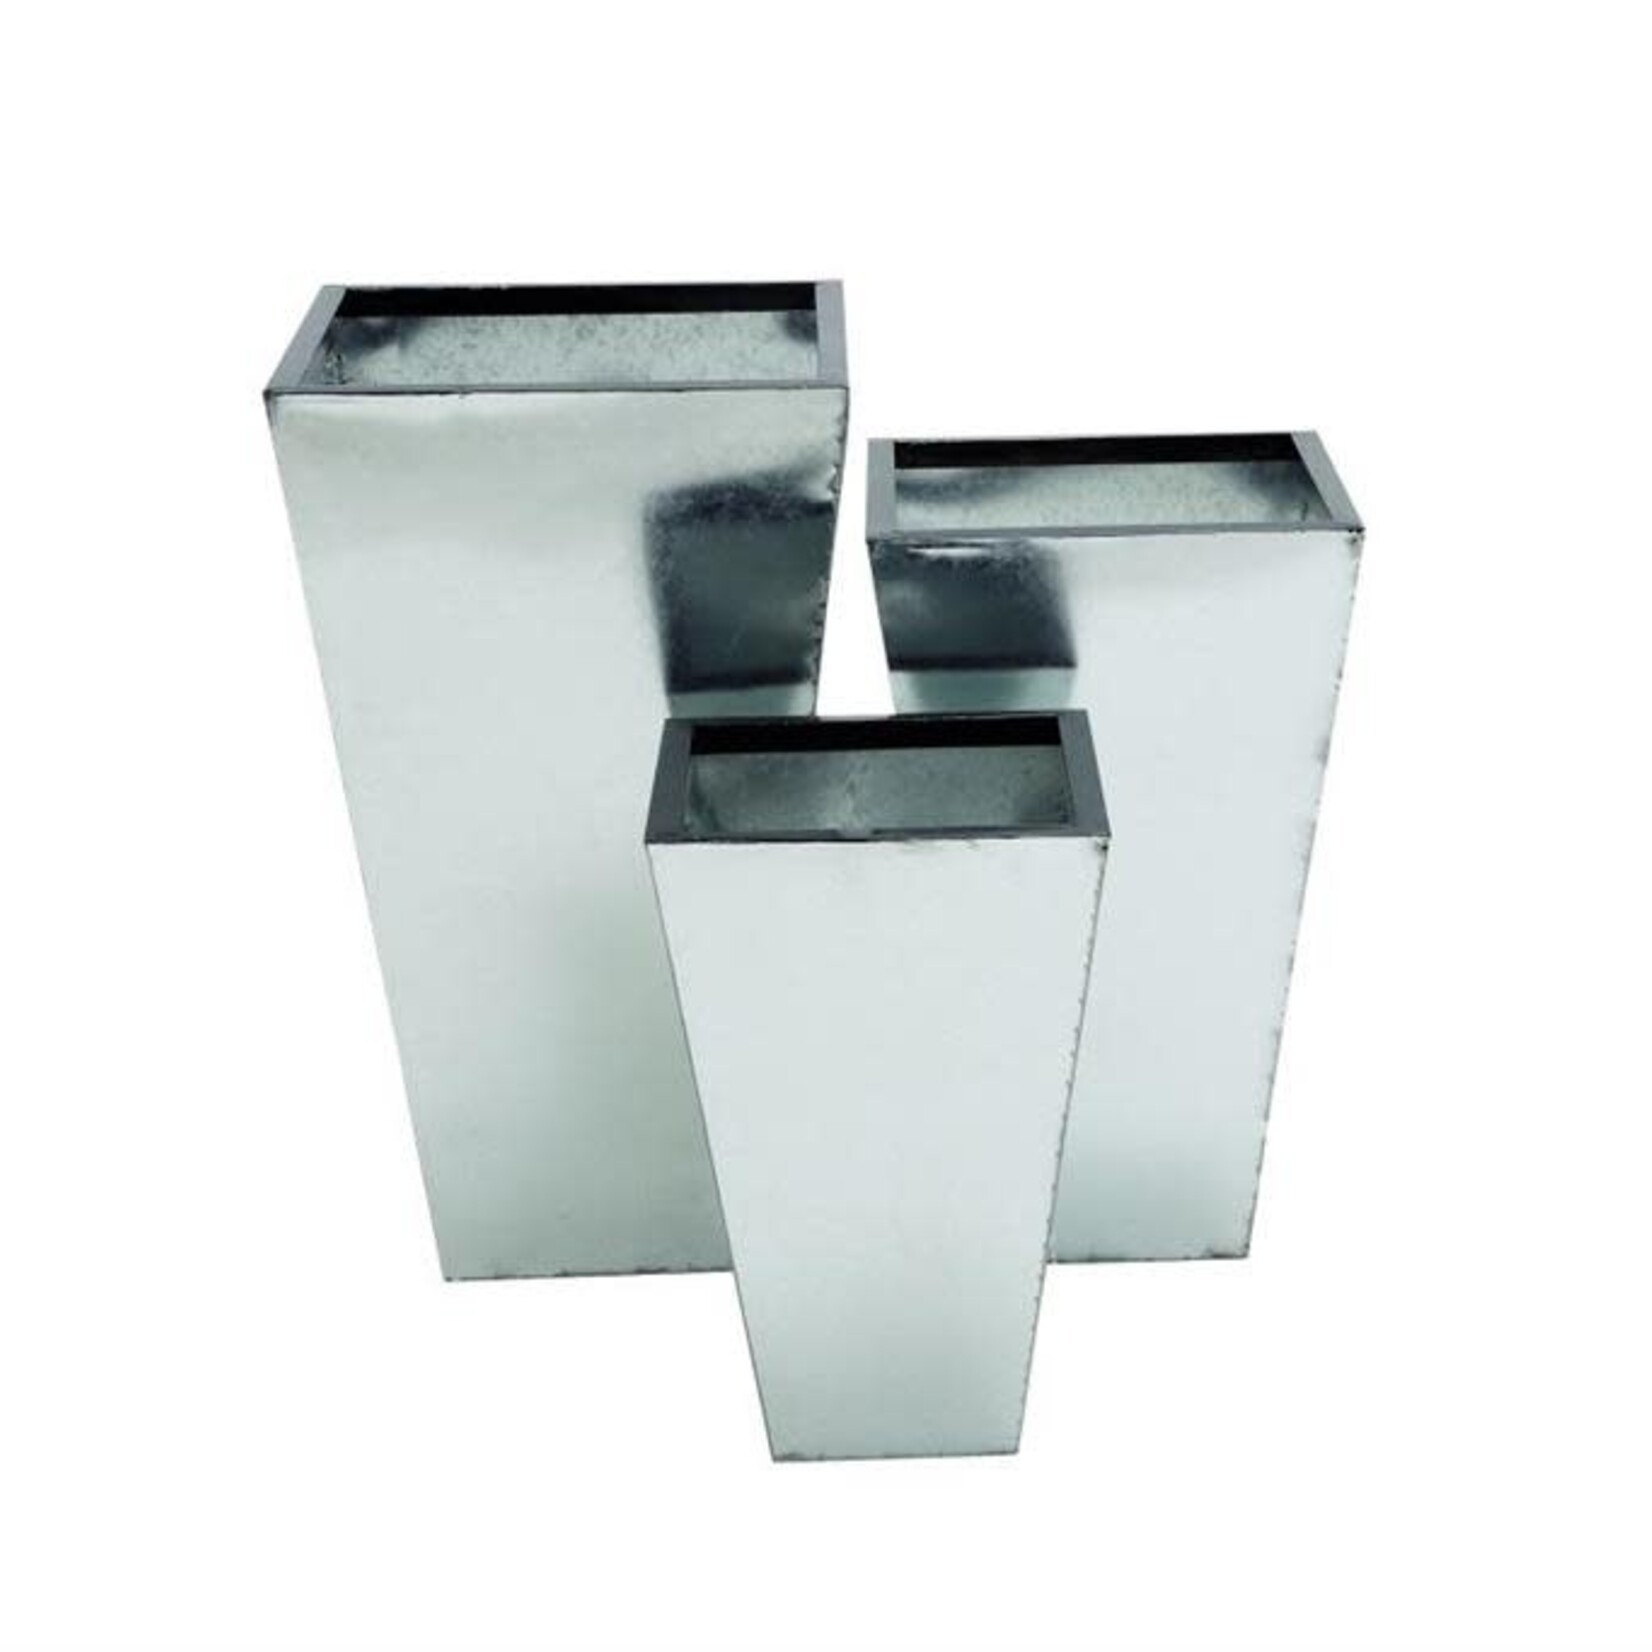 60% OFF WAS $70 NOW $28.00, 21”h x 13” SILVER METAL PLANT STAND